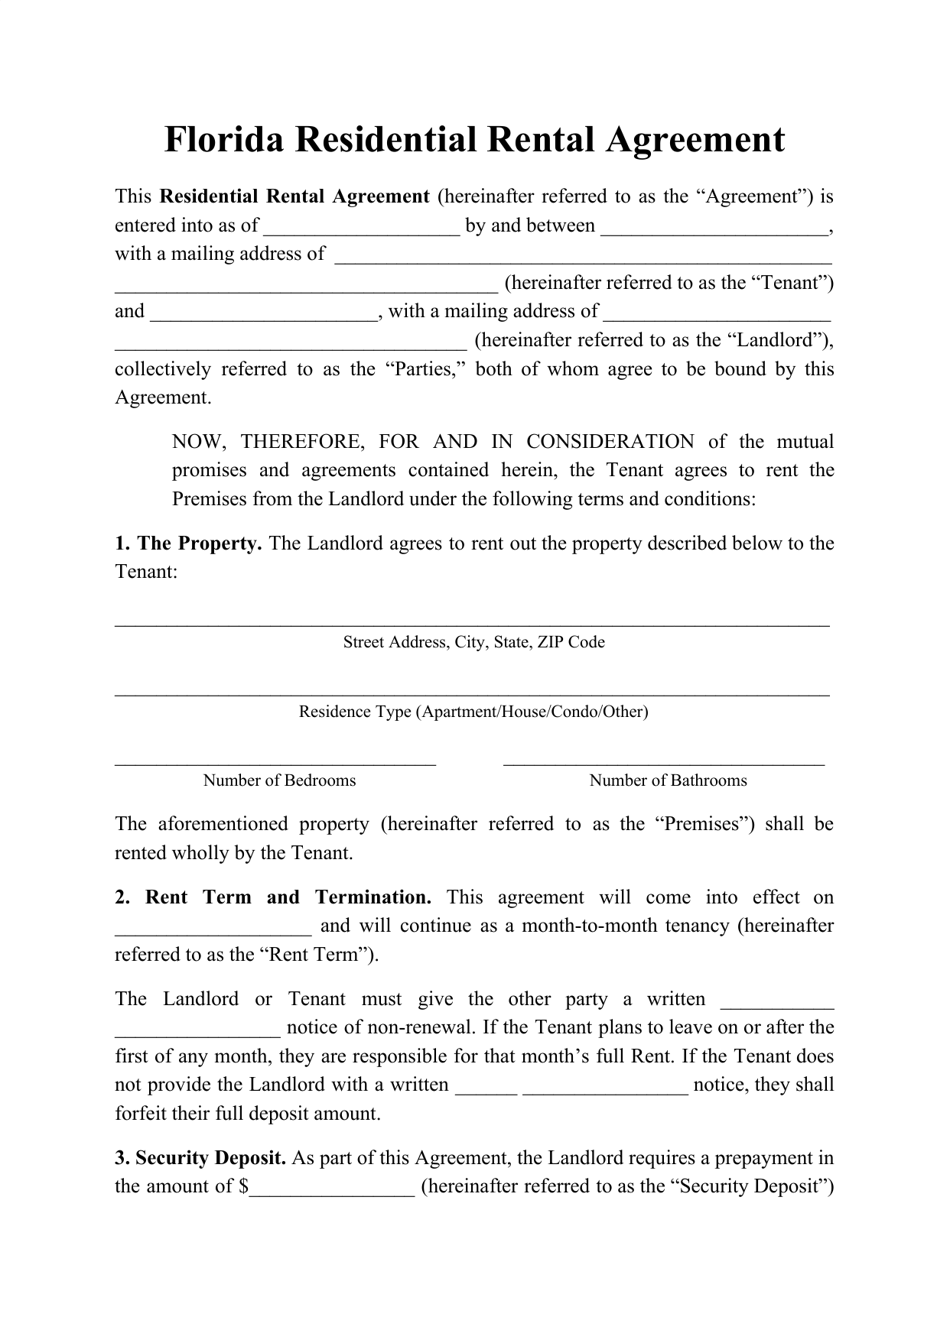 florida-residential-rental-agreement-template-fill-out-sign-online